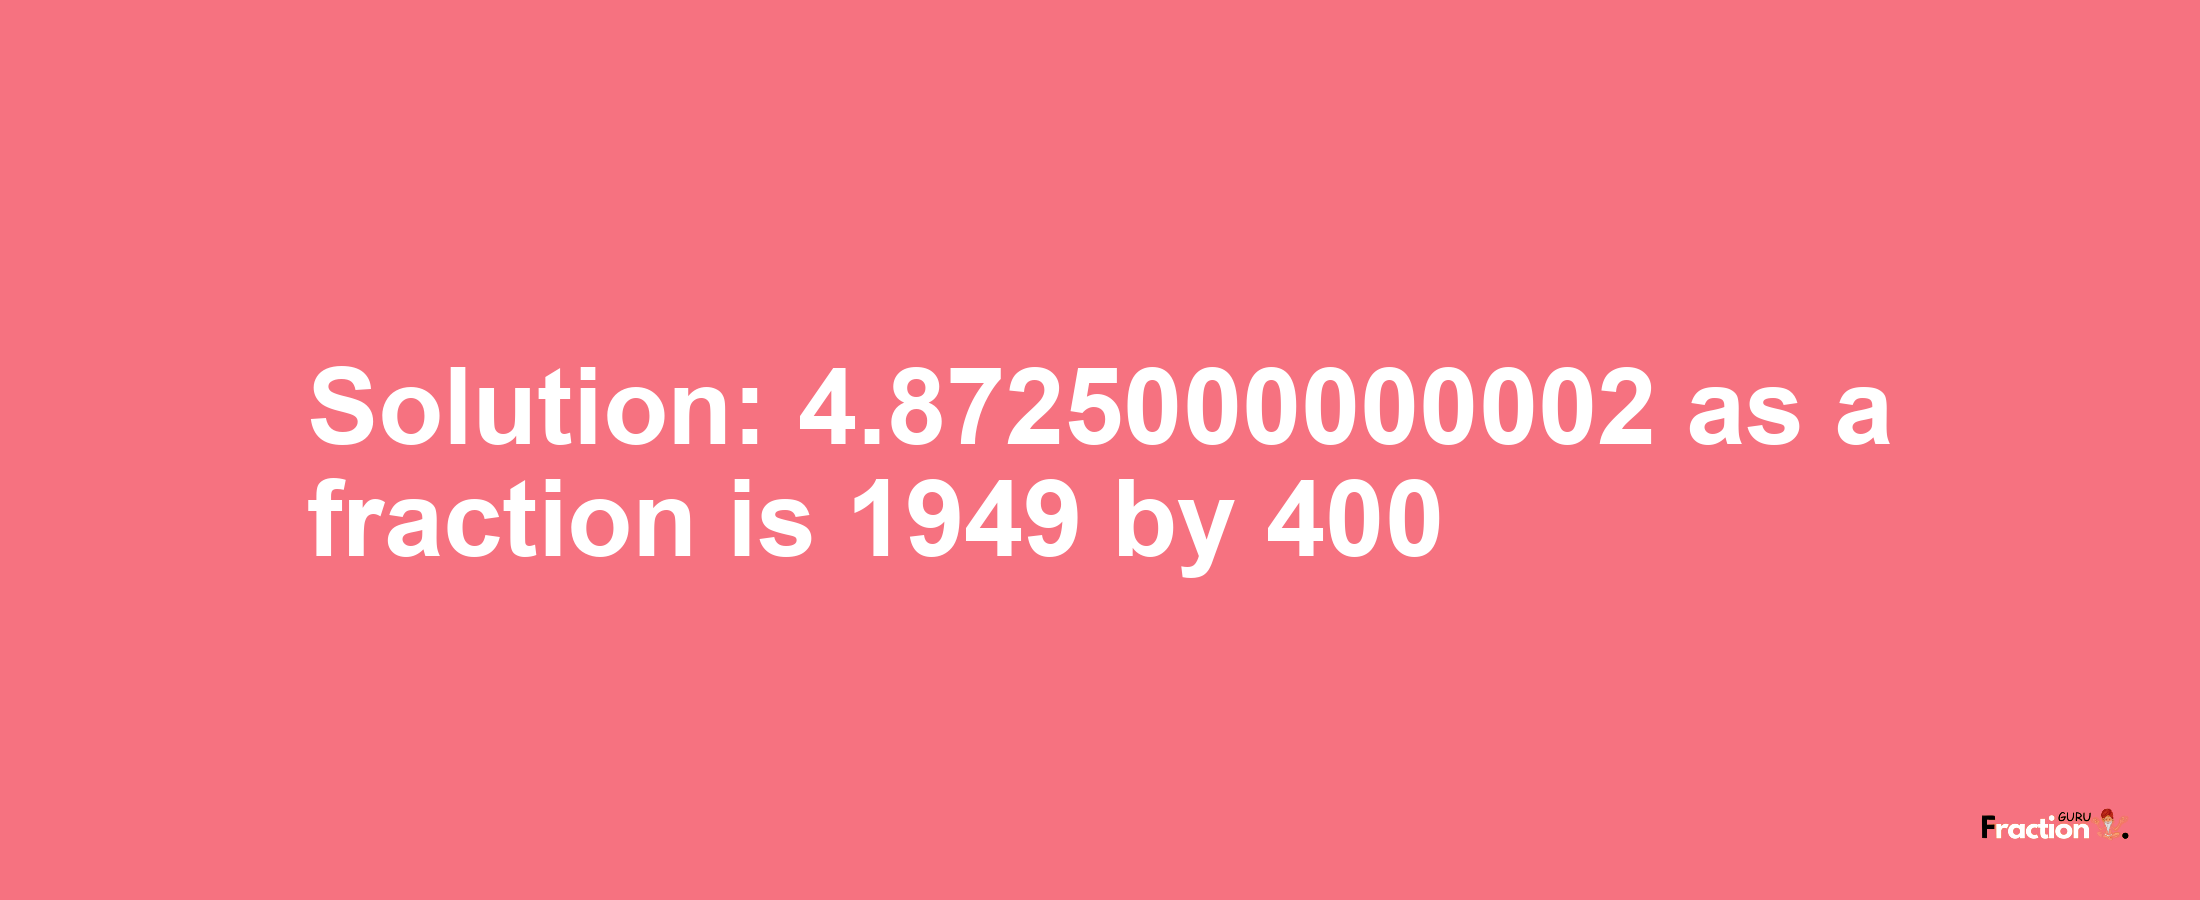 Solution:4.8725000000002 as a fraction is 1949/400